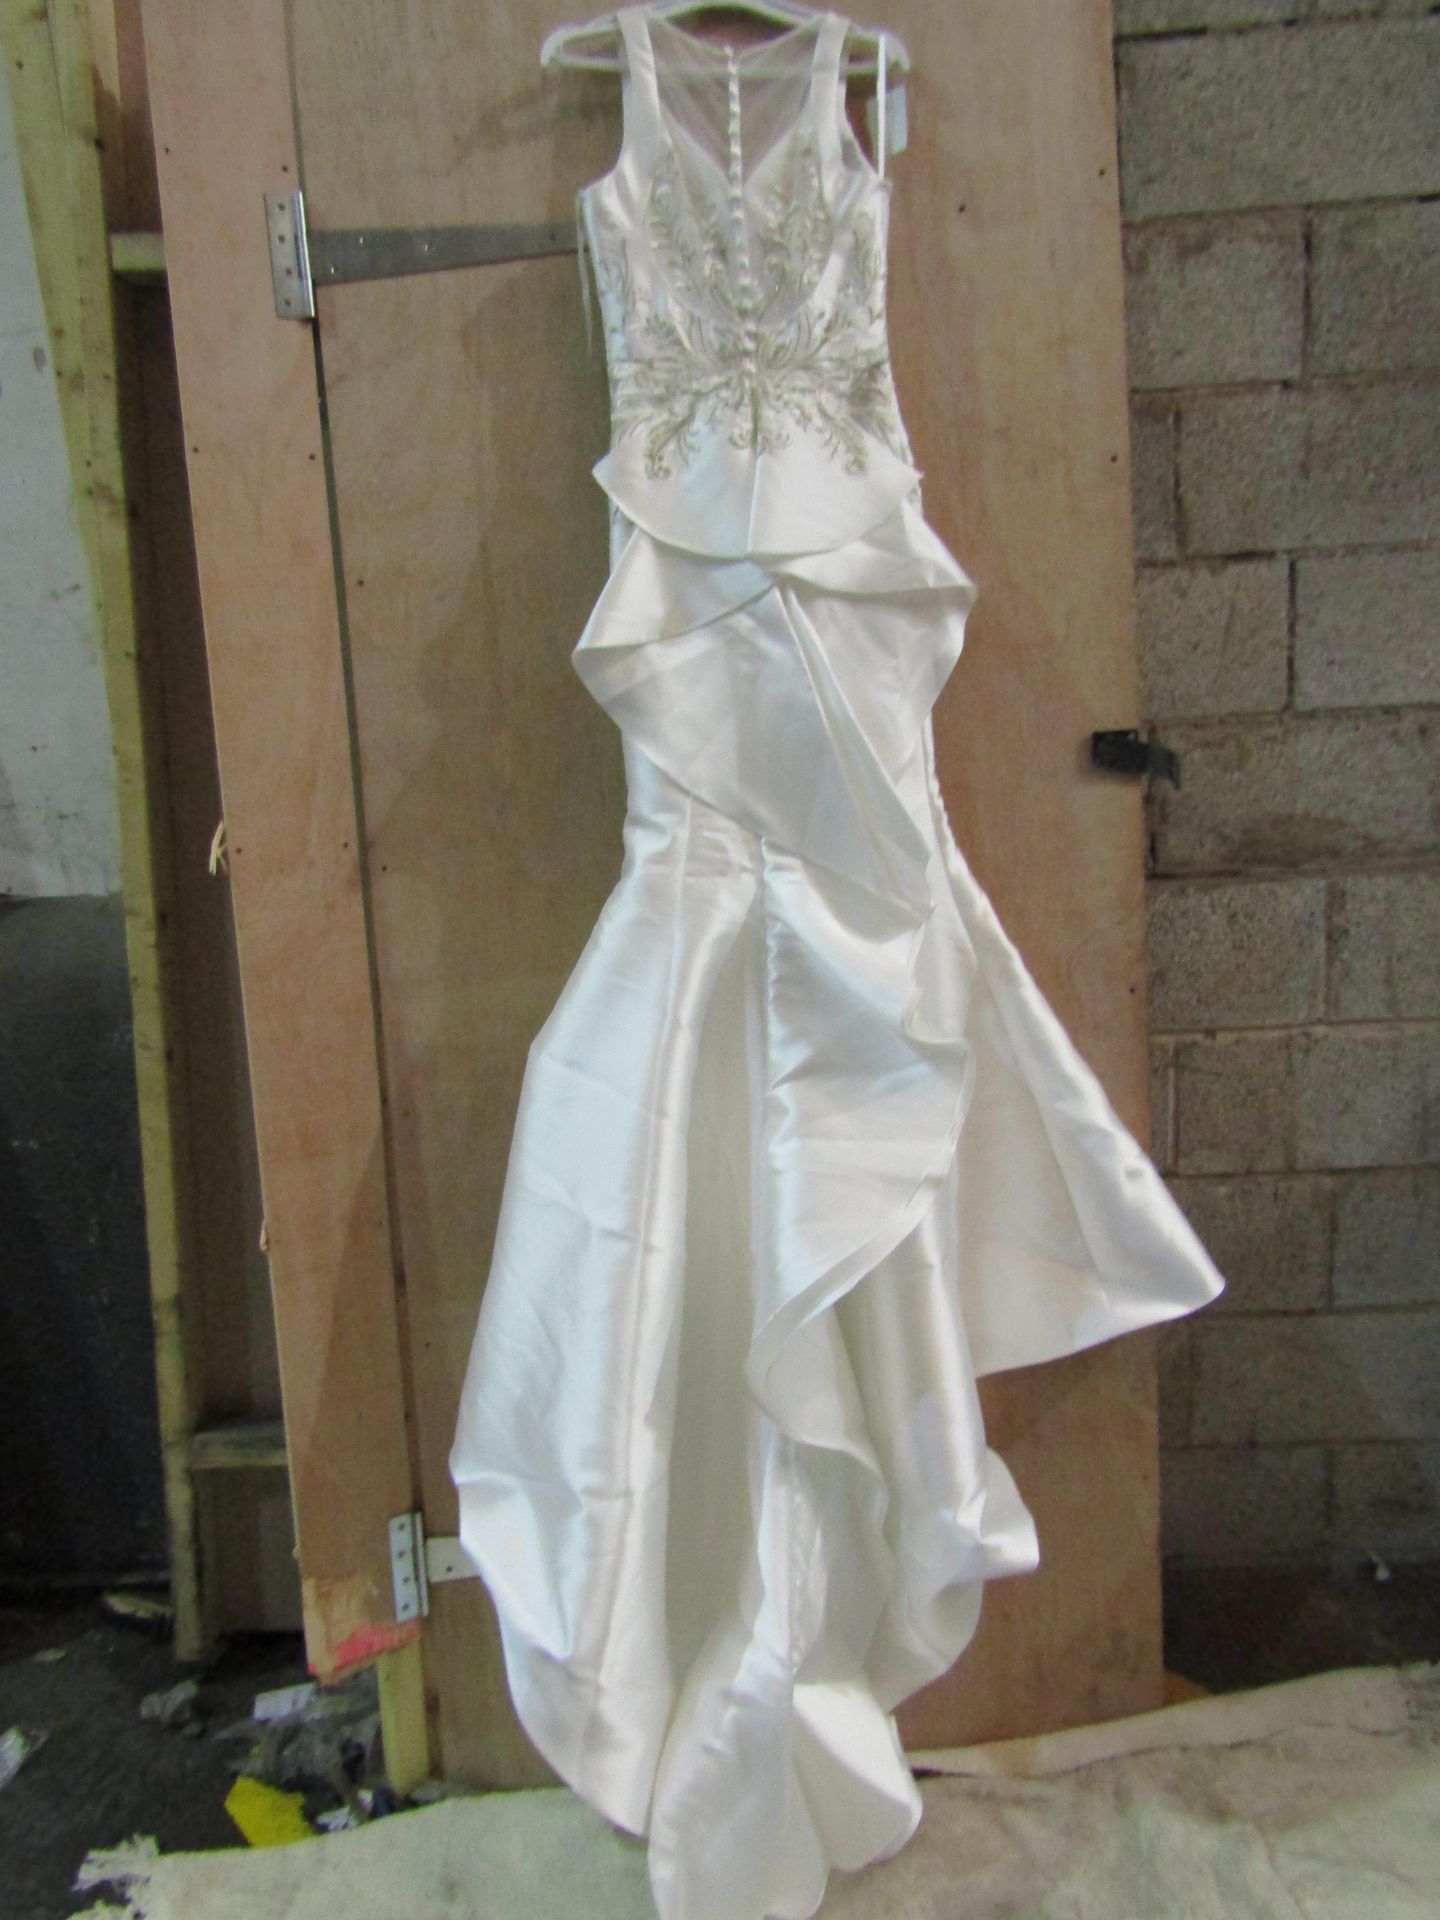 Approx 500 pieces of wedding shop stock to include wedding dresses, mother of the bride, dresses, - Image 18 of 43